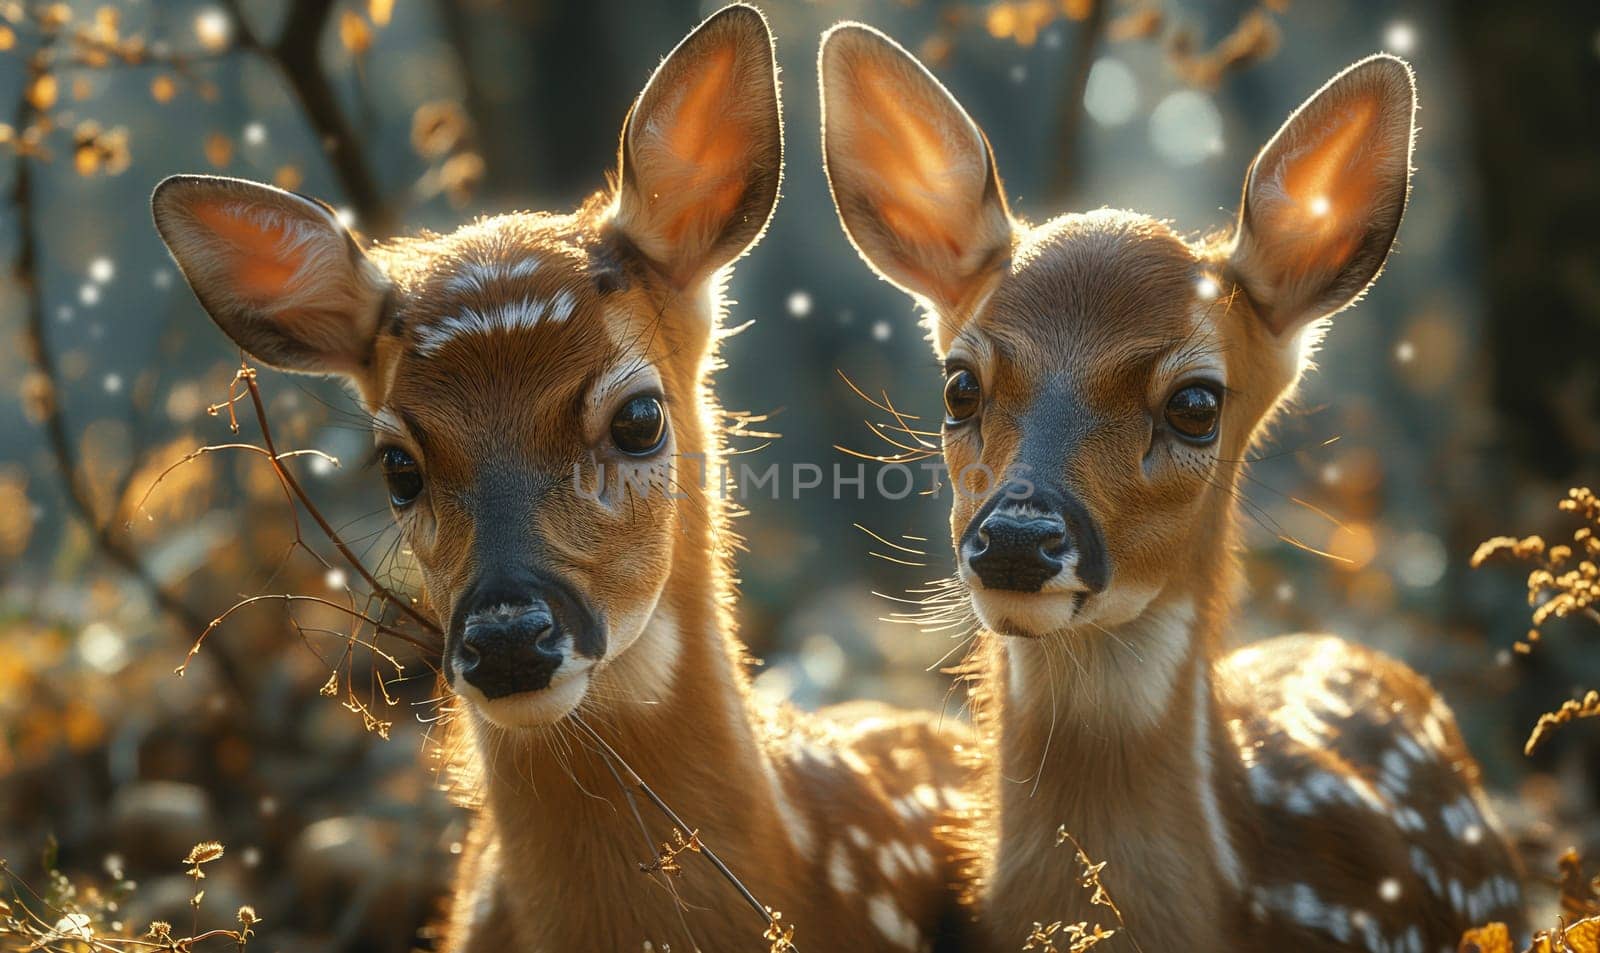 Two Deer Standing Together in Forest. by Fischeron